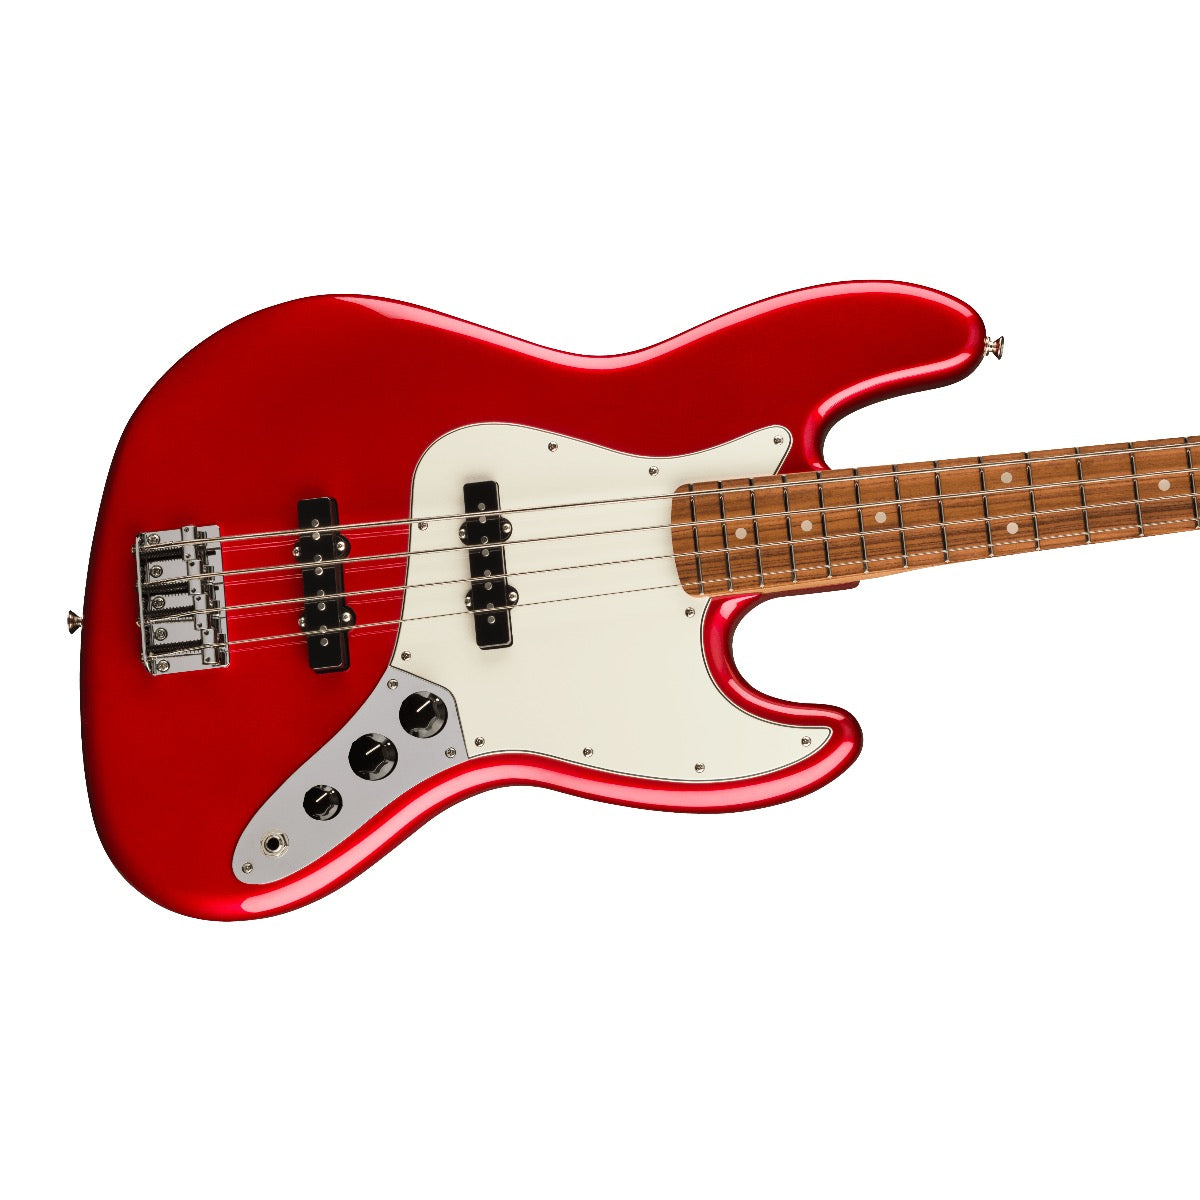 Fender Player Jazz Bass PF - Candy Apple Red, View 5